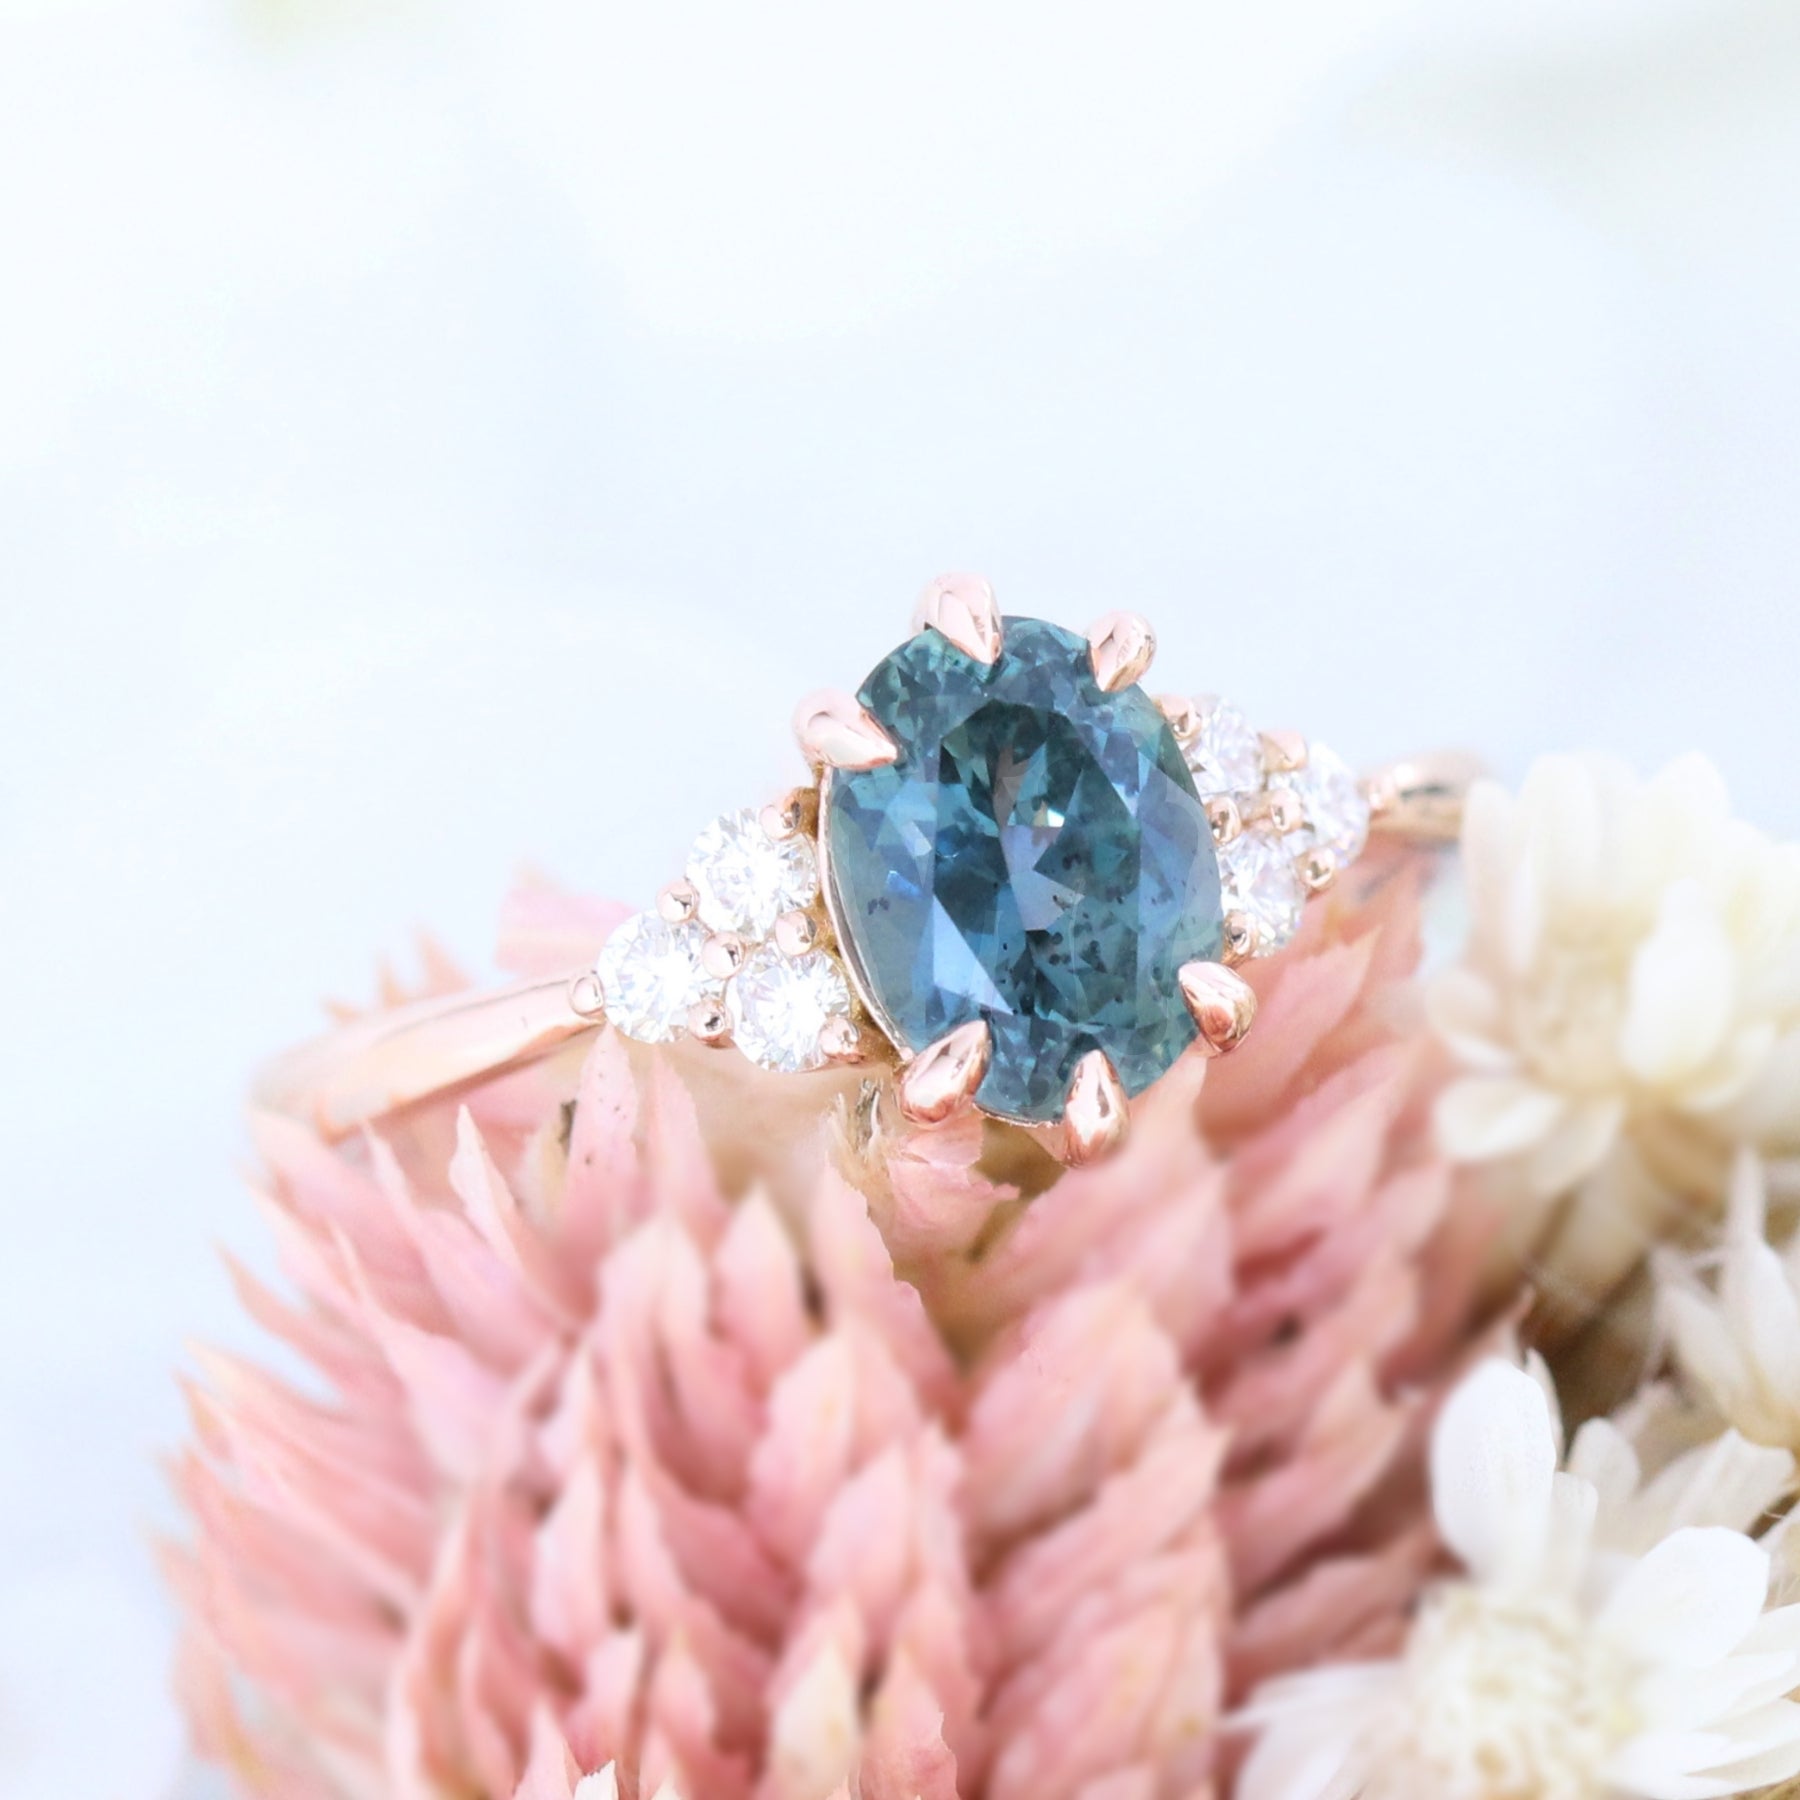 Teal Sapphire Ring Rose Gold 3 Stone Diamond Engagement Ring La More Design Jewelry